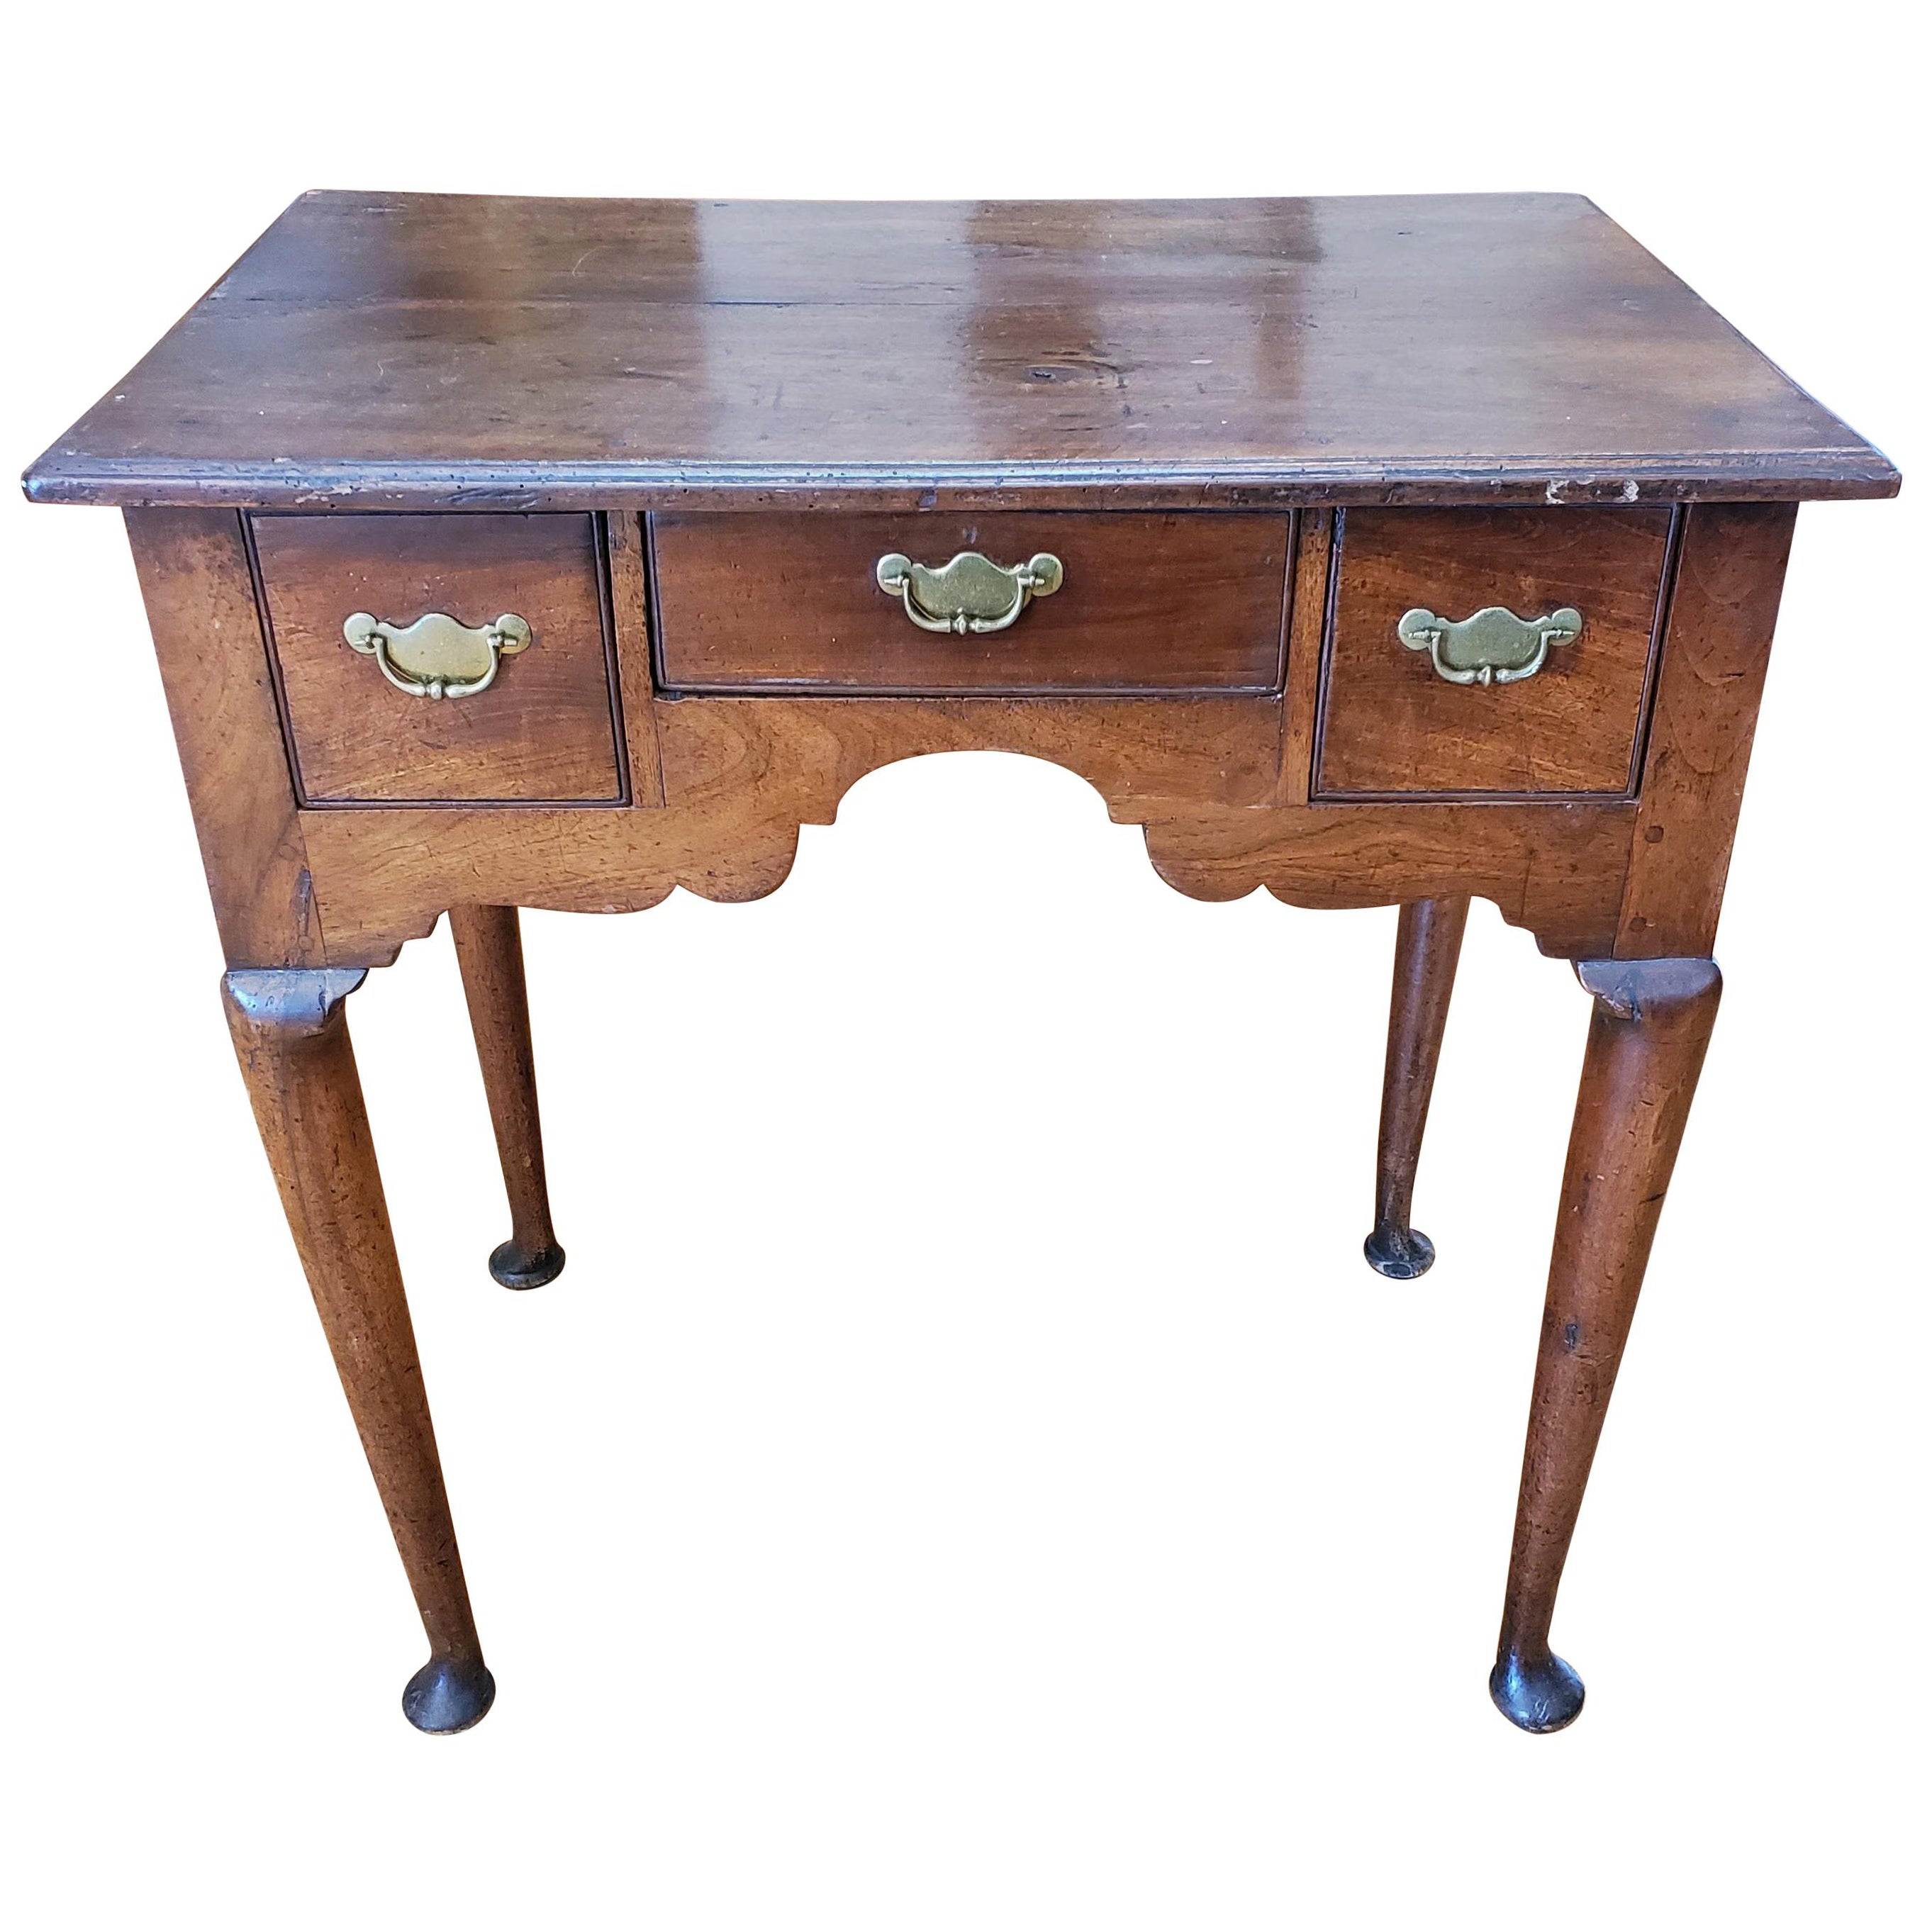 Early 18th Century Walnut Lowboy Table with Three Drawers and Cabriole Legs